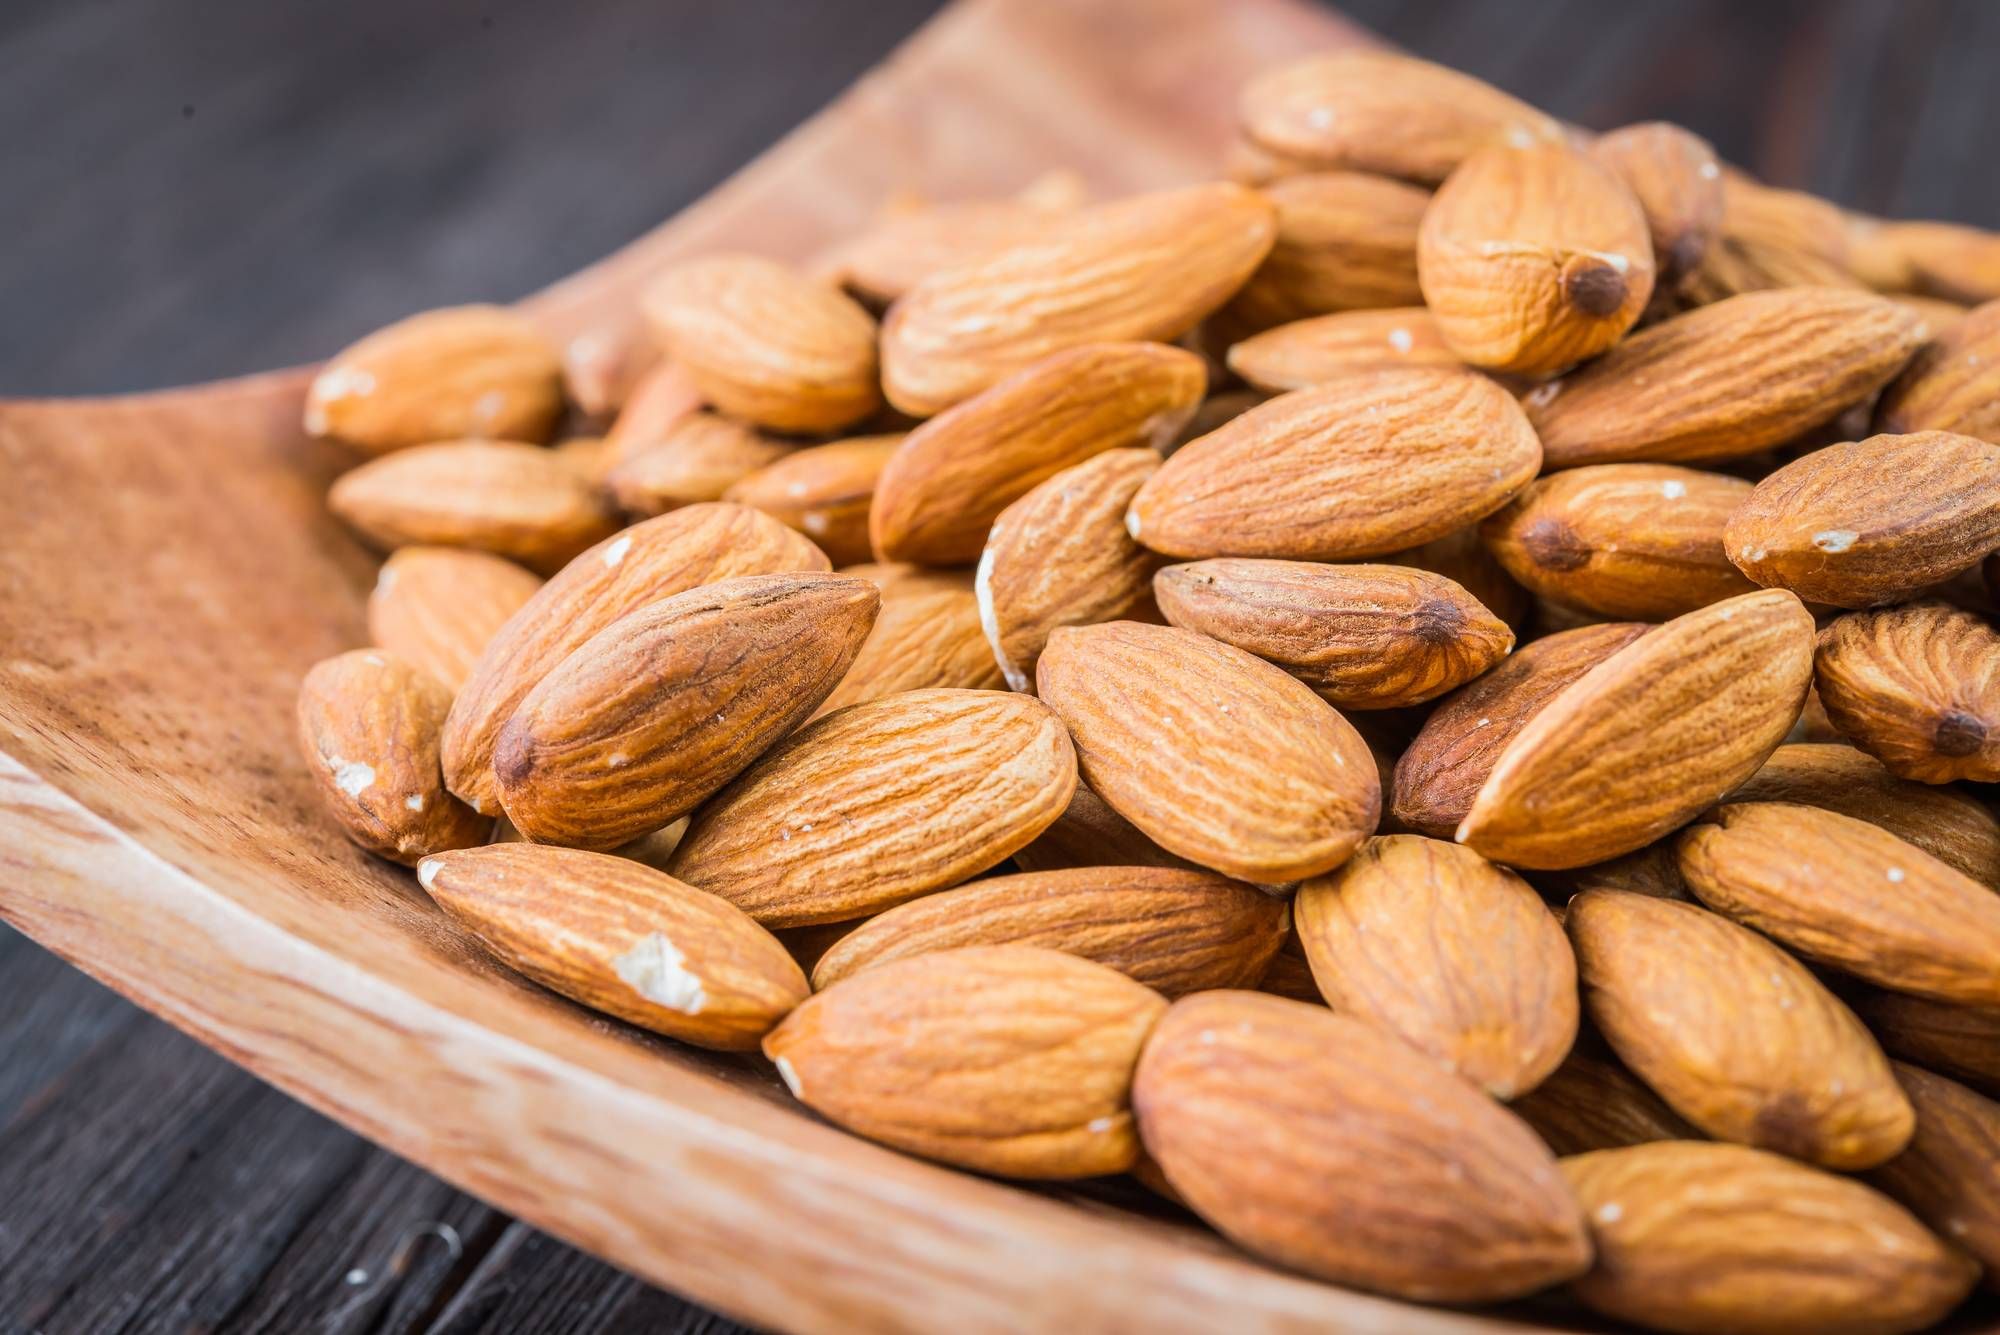 Family Dollar almonds are allegedly advertised as smoked almonds despite added flavoring.